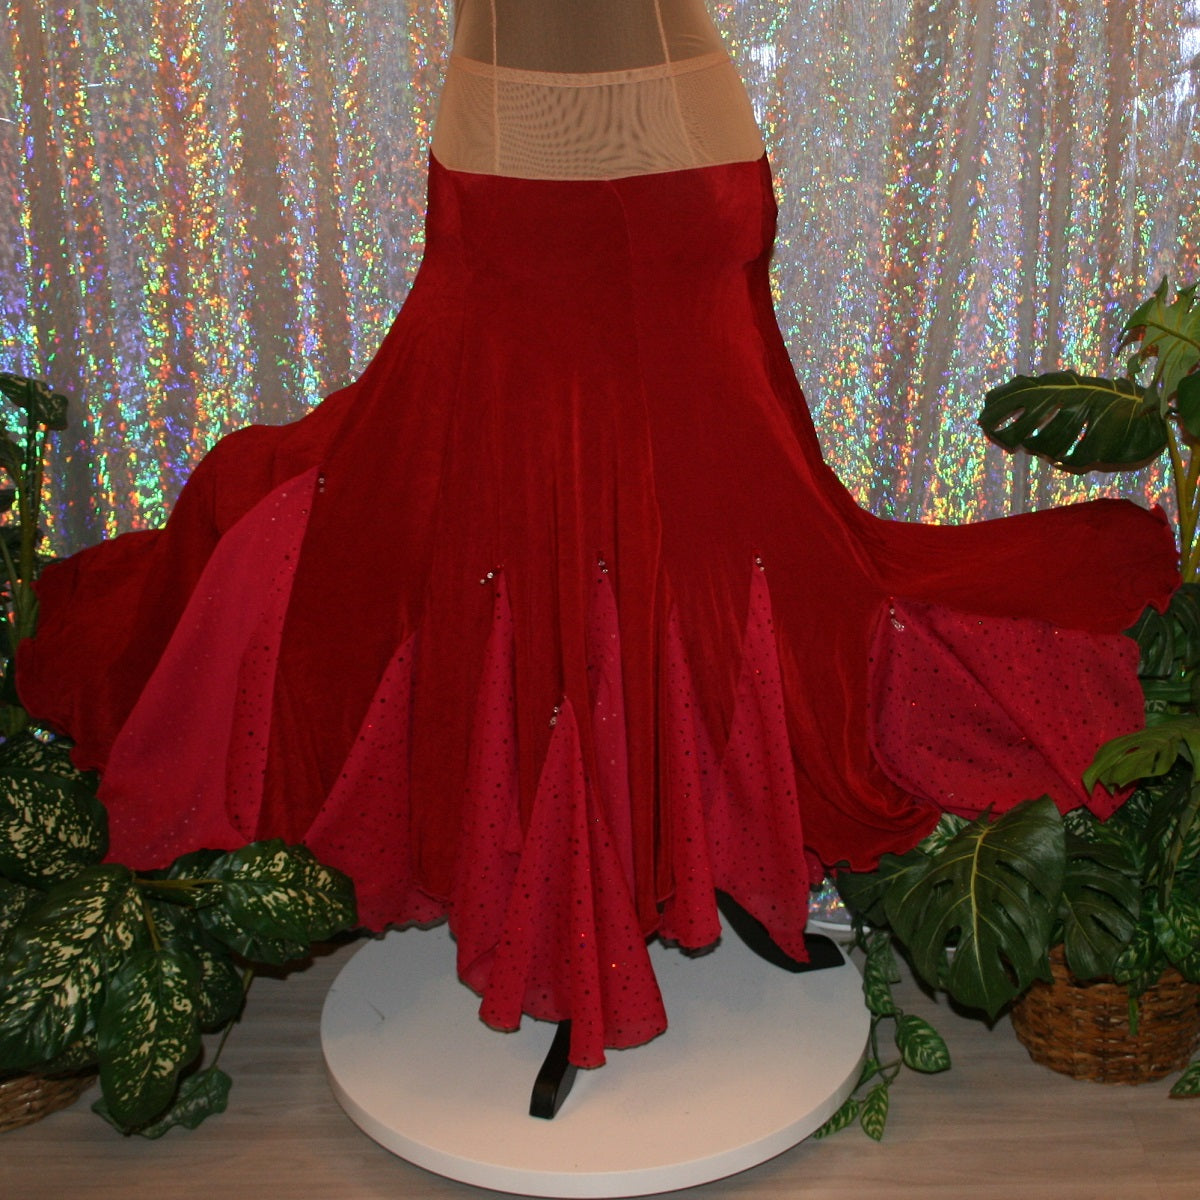 Scarlet red ballroom dance skirt created of luxurious scarlet red solid slinky with insets & floats of scarlet red champagne sequined chiffon with a touch of Swarovski hand beading.